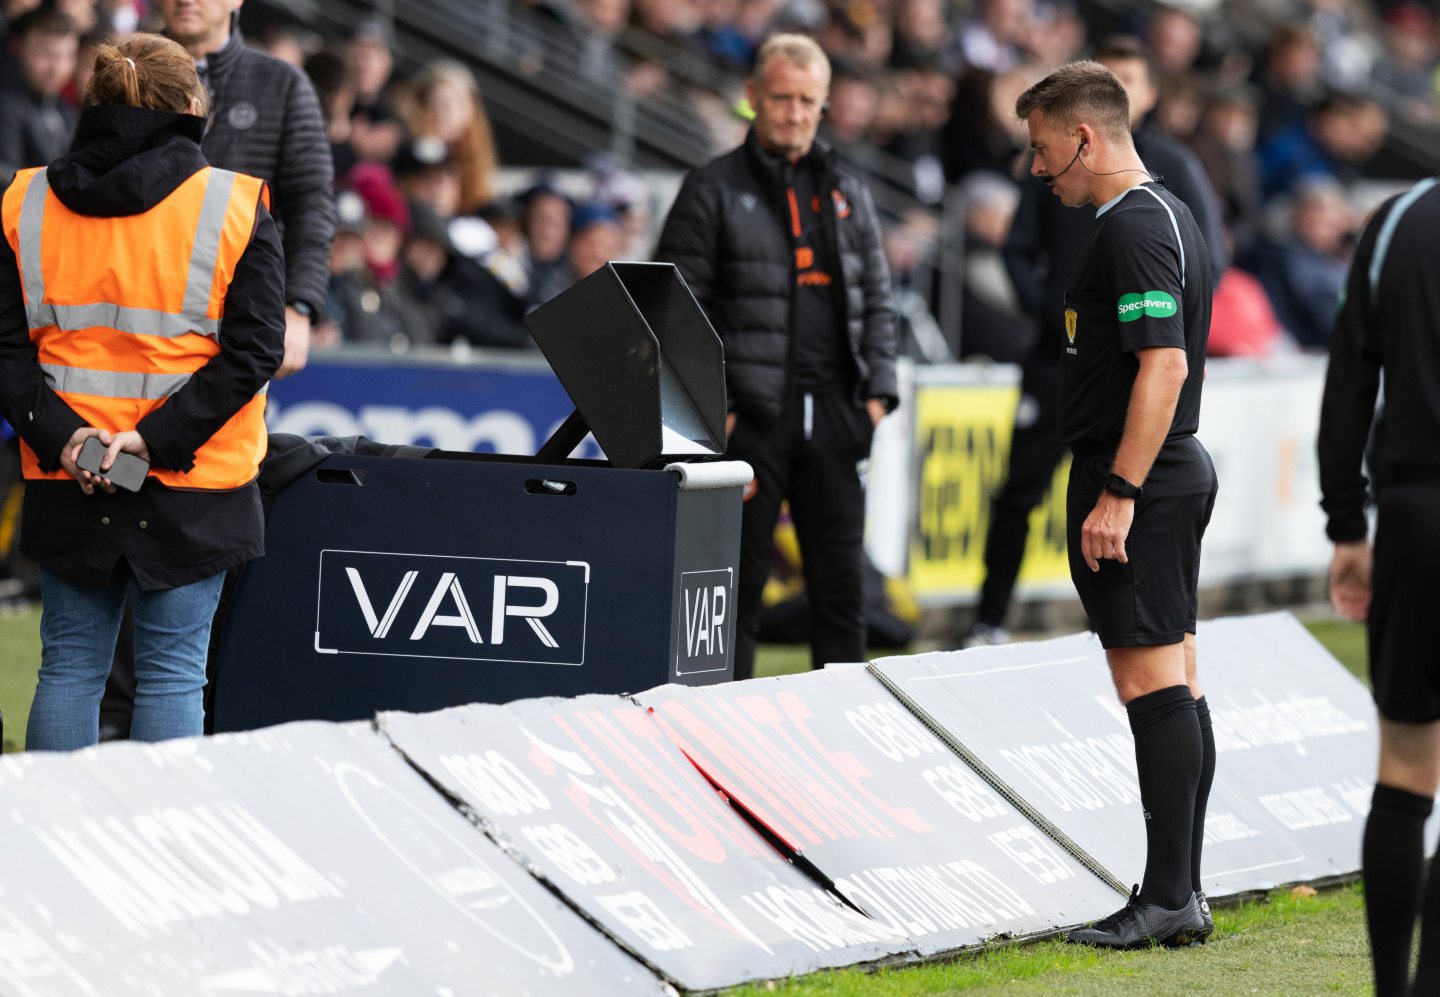 VAR is delaying the game too much, reckons Rab Douglas. Image: SNS